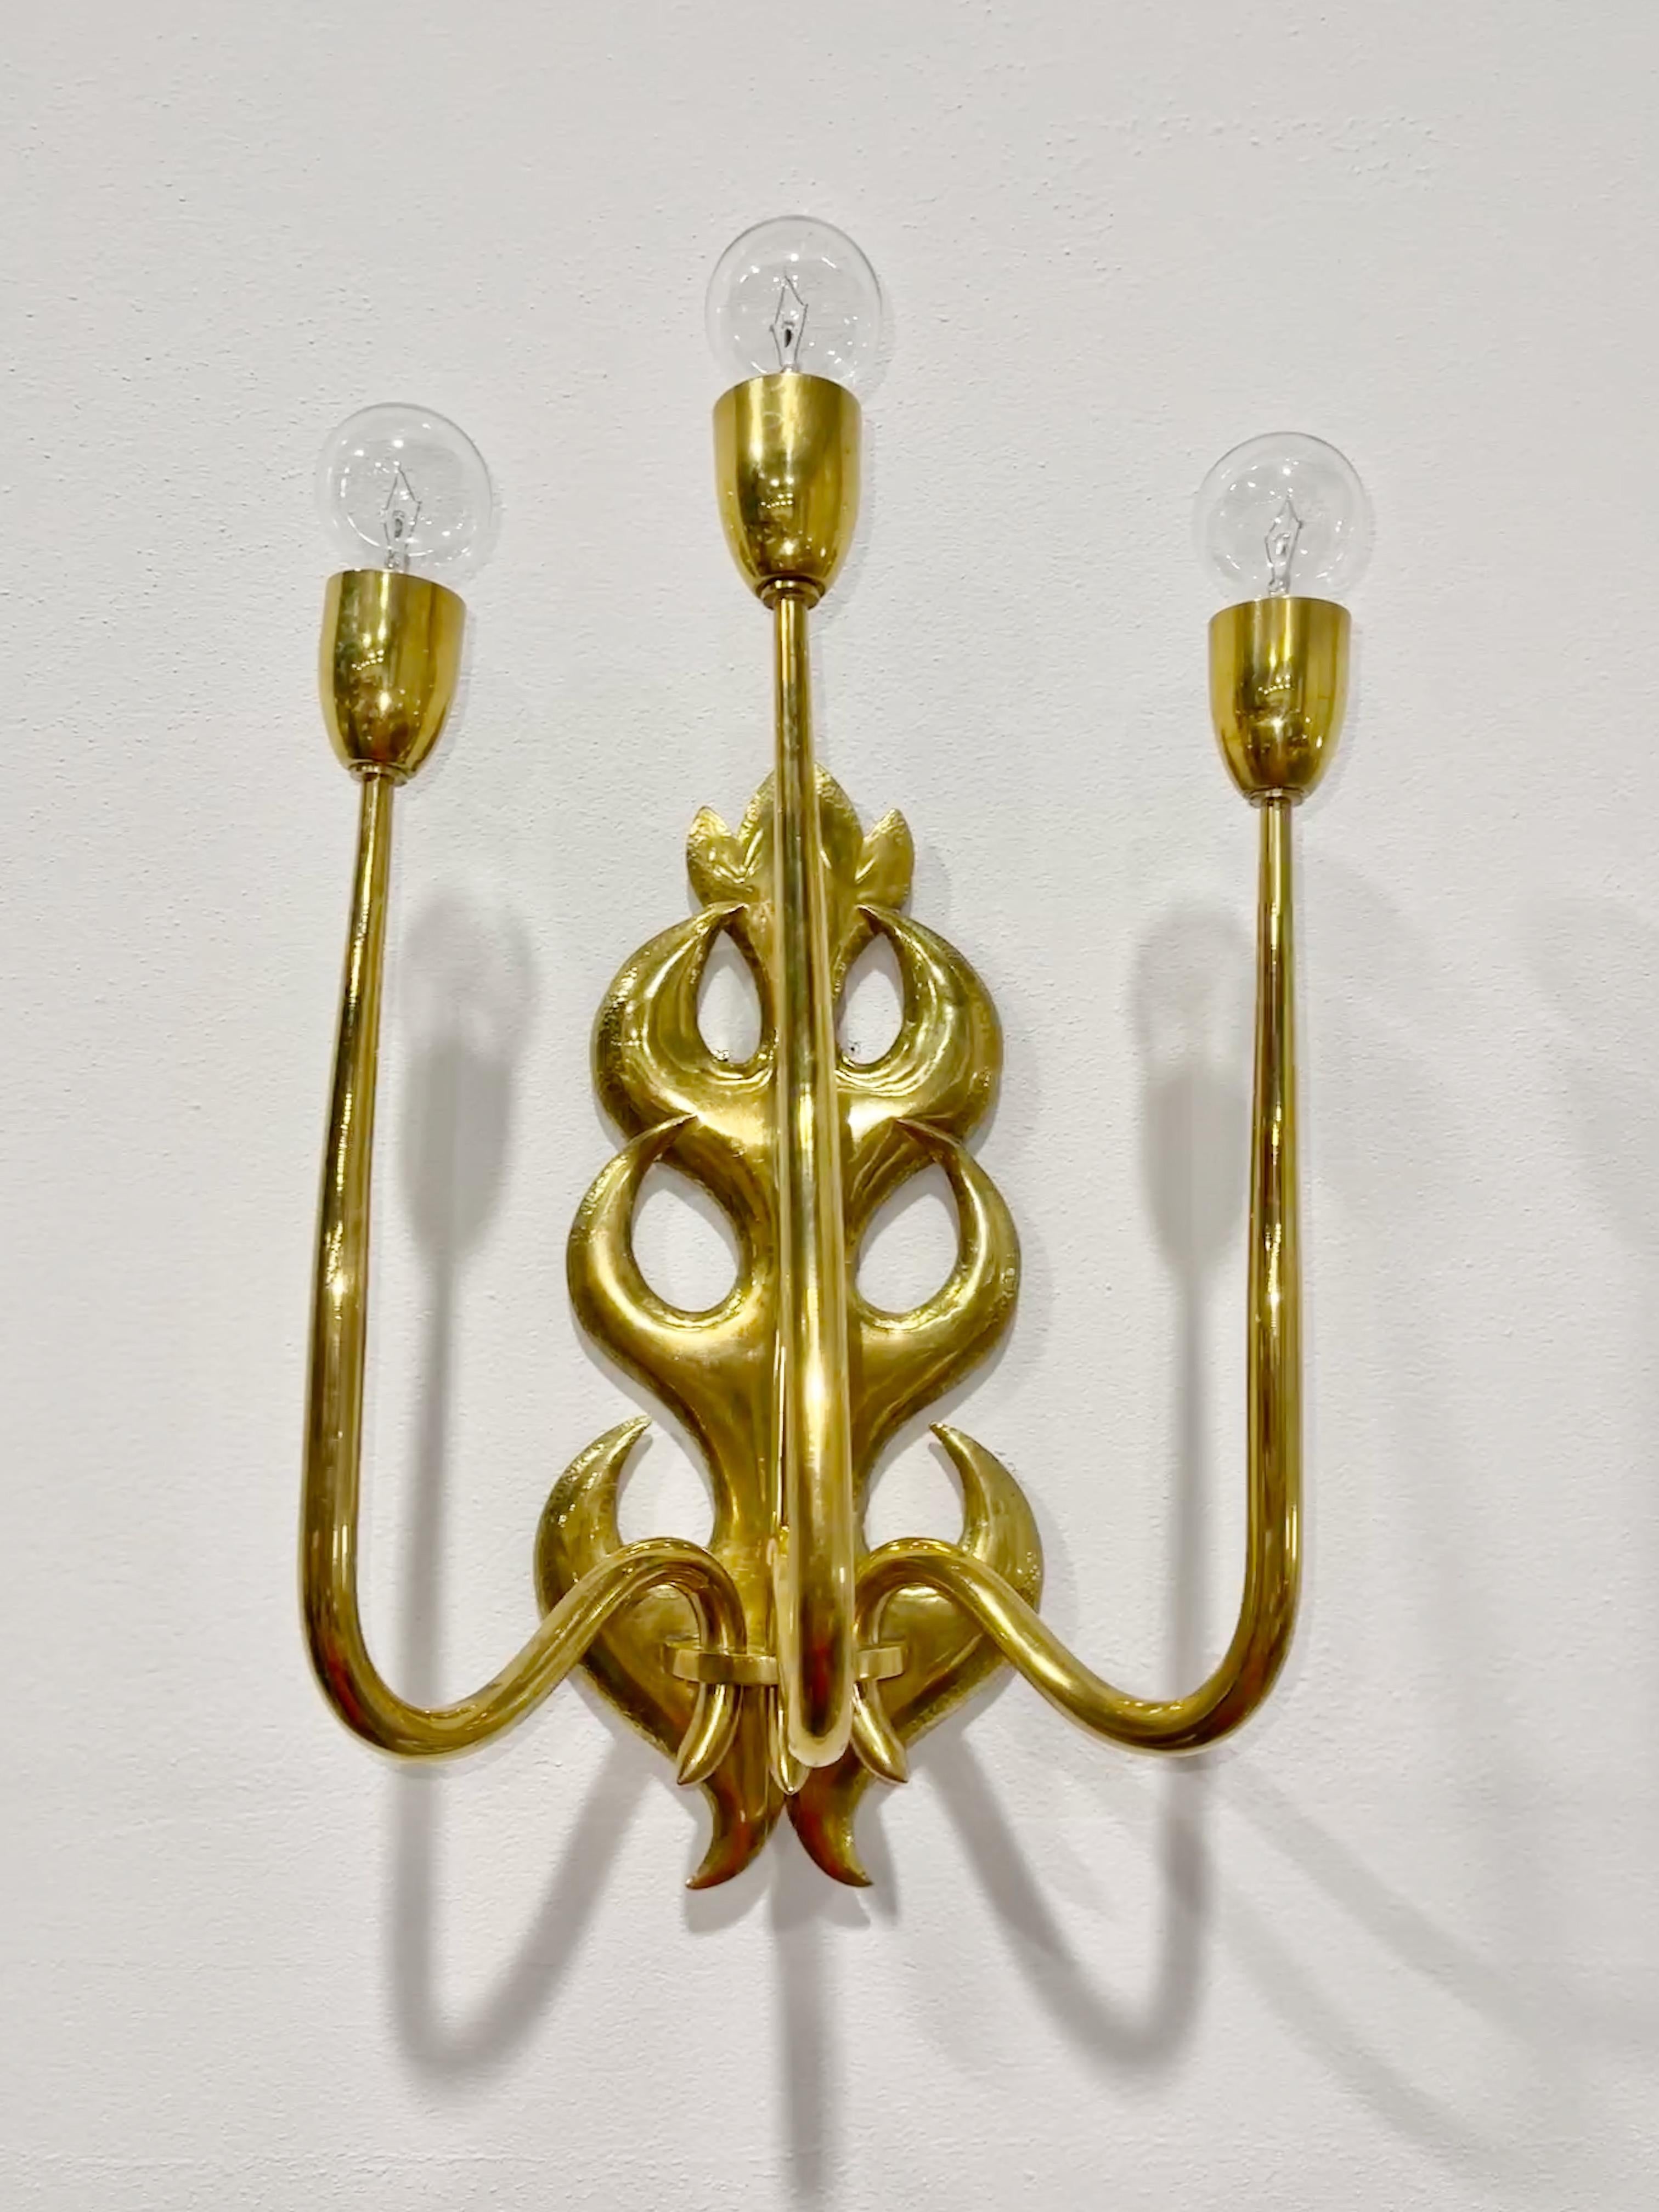 A single grand scale 1950s Italian brass three arm wall lamp in the manner of Osvaldo Borsani and Tomaso Buzzi.
Backplate is hand hammered and chased brass in the form of modernistic acanthus leaves.
Three curvaceous tapered brass arms topped with